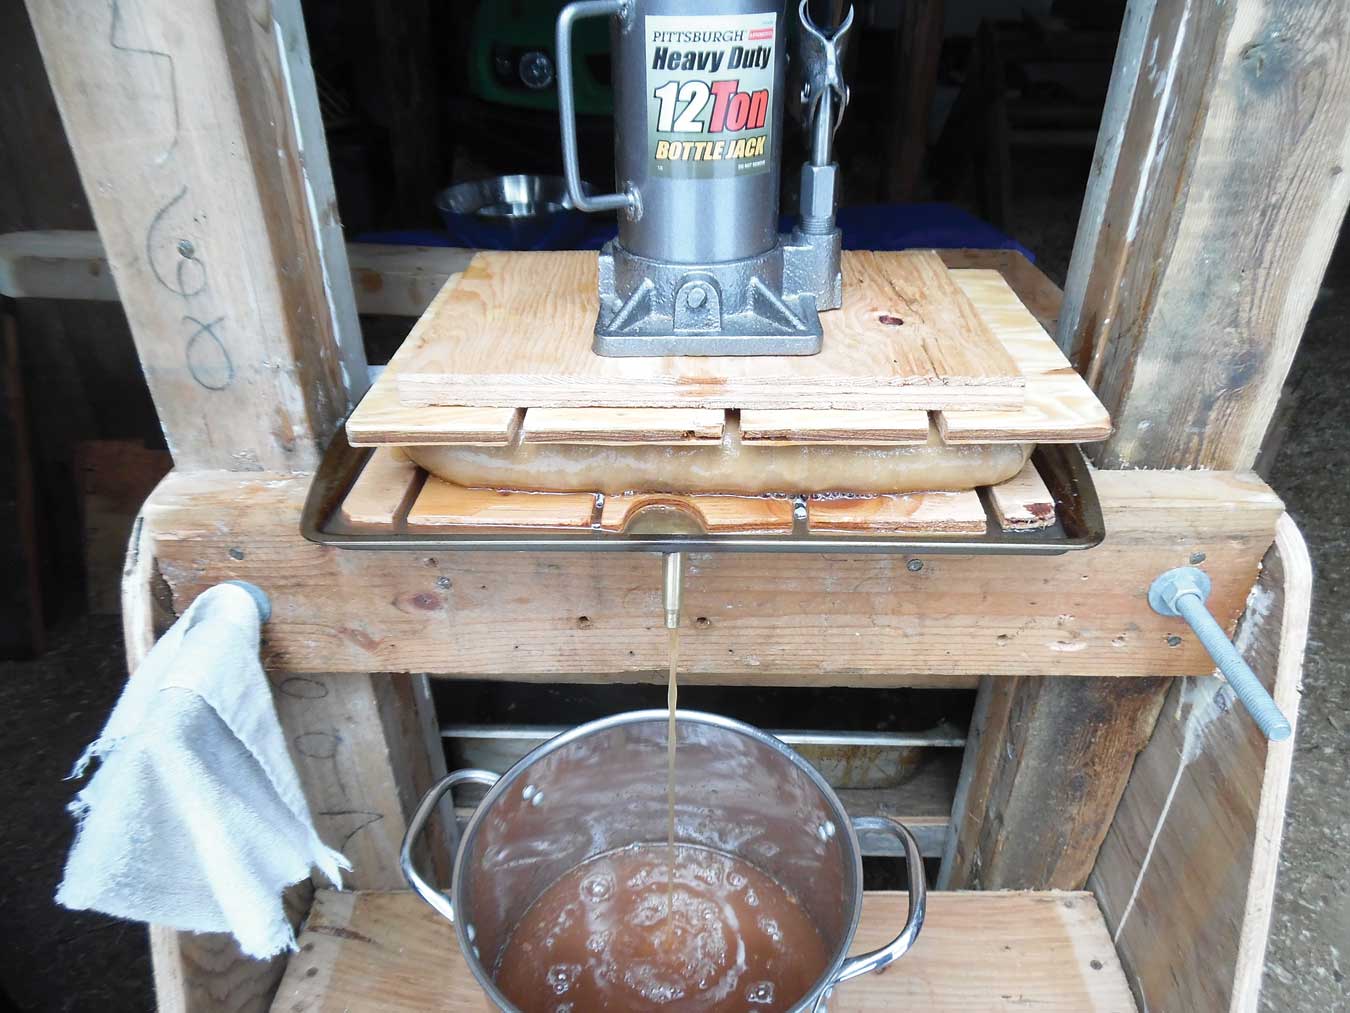 using the homemade press for cider